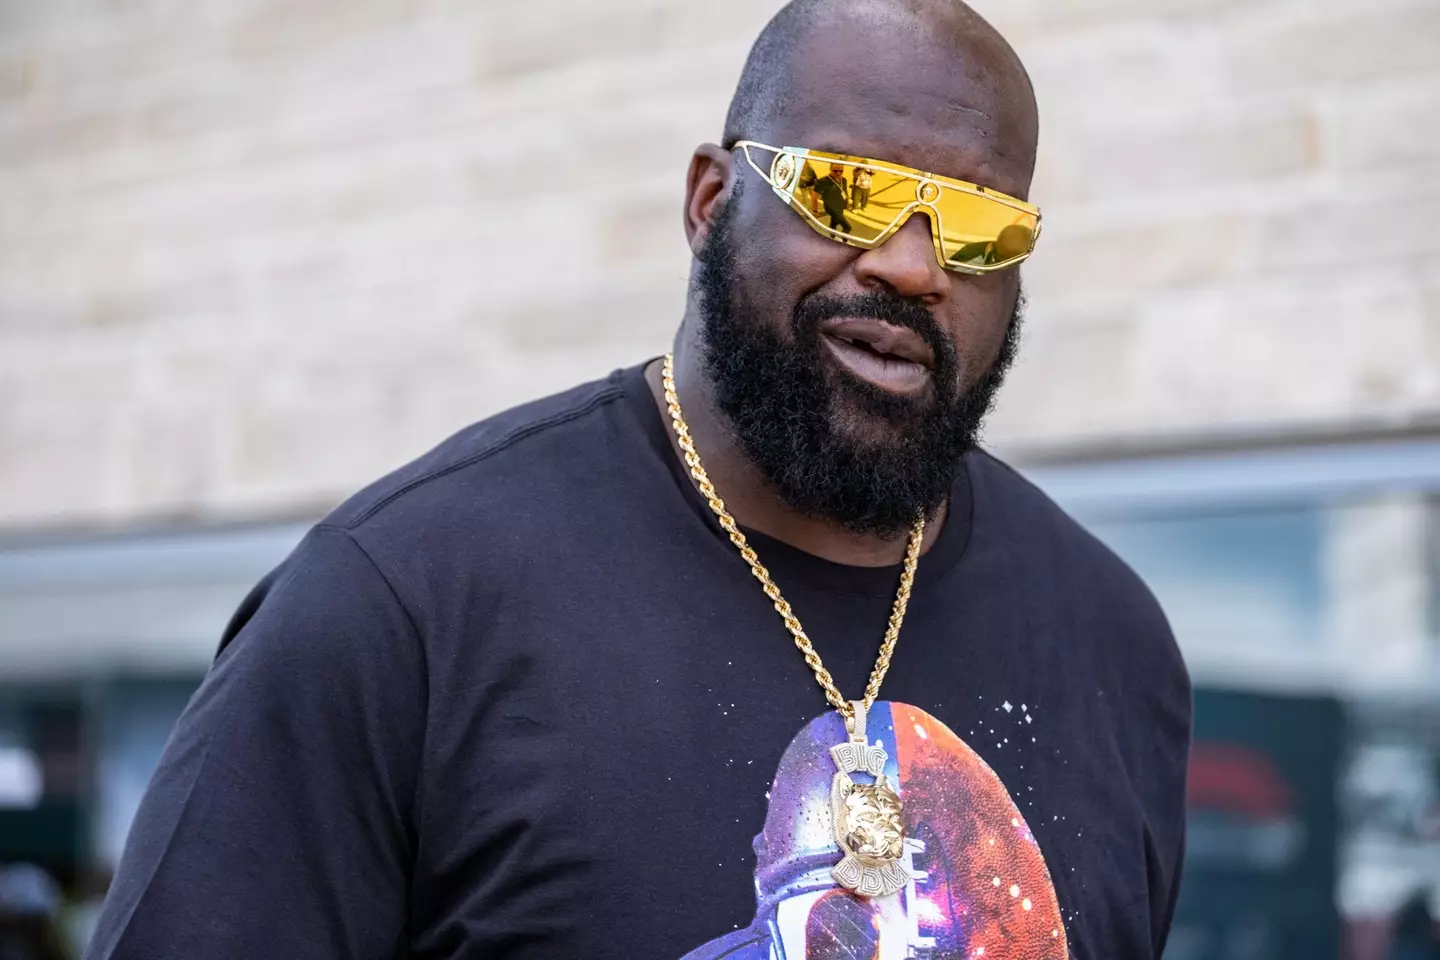 Shaquille O'Neal at the 2022 Formula One final.